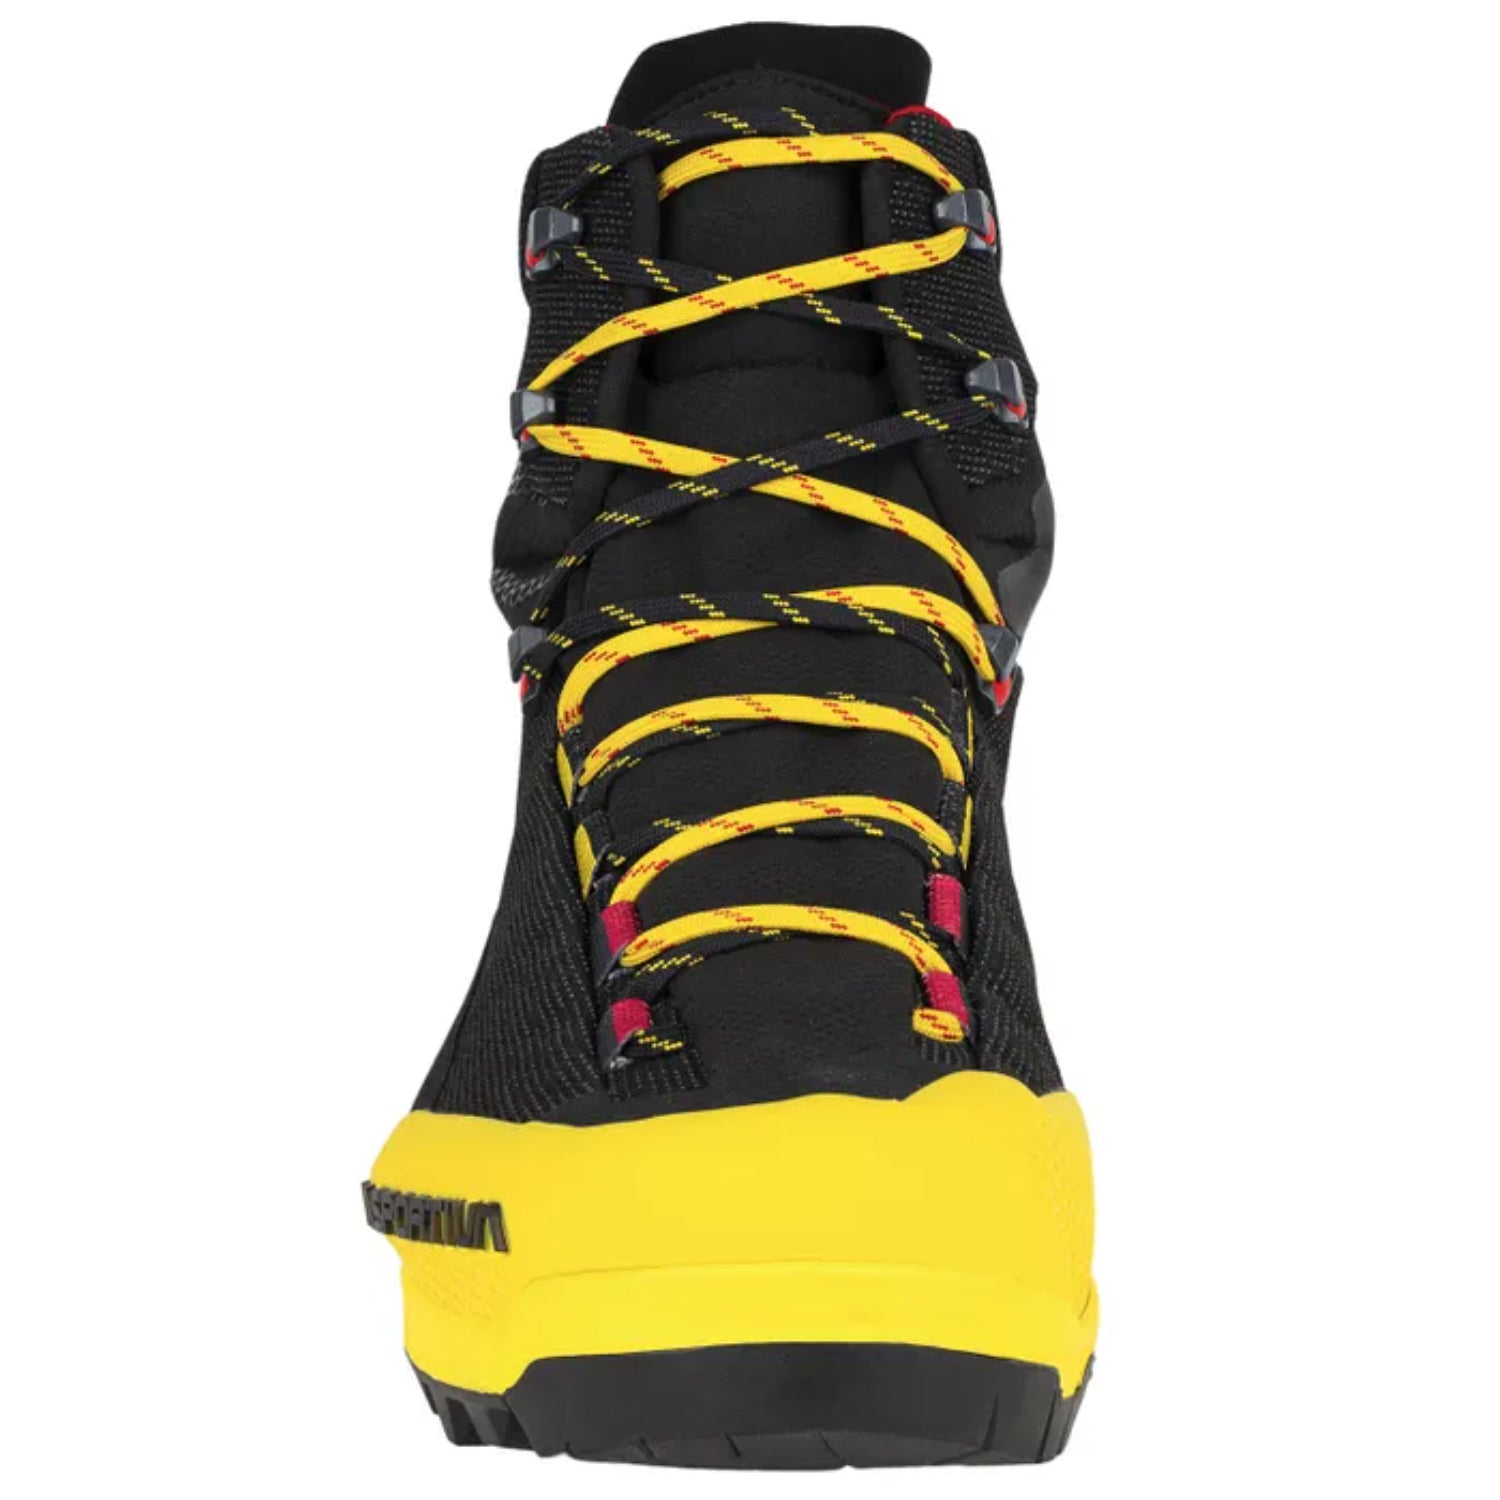 La Sportiva Aequilibrium ST GTX Mountaineering Boots | Buy now at Rock+Run